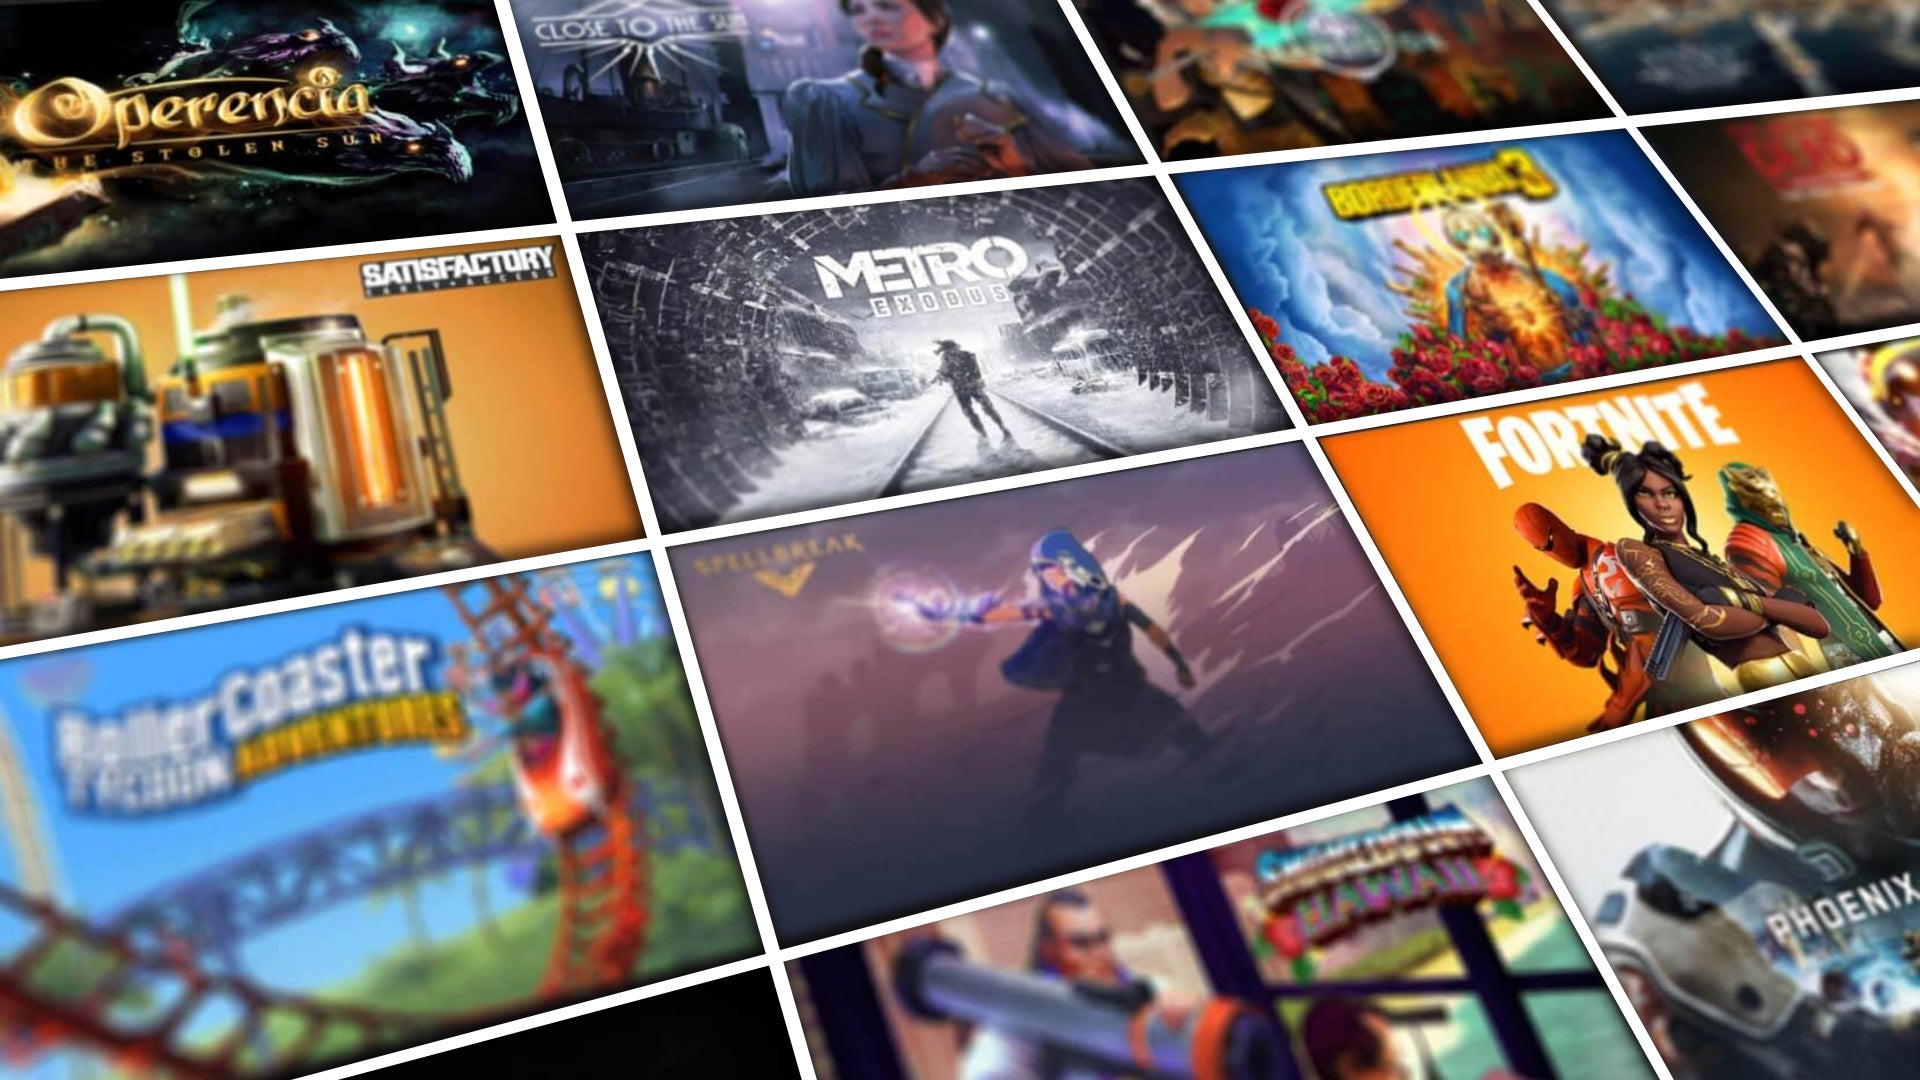 Promotional art for the Epic Games Store showing several tile cards for games available on the store.